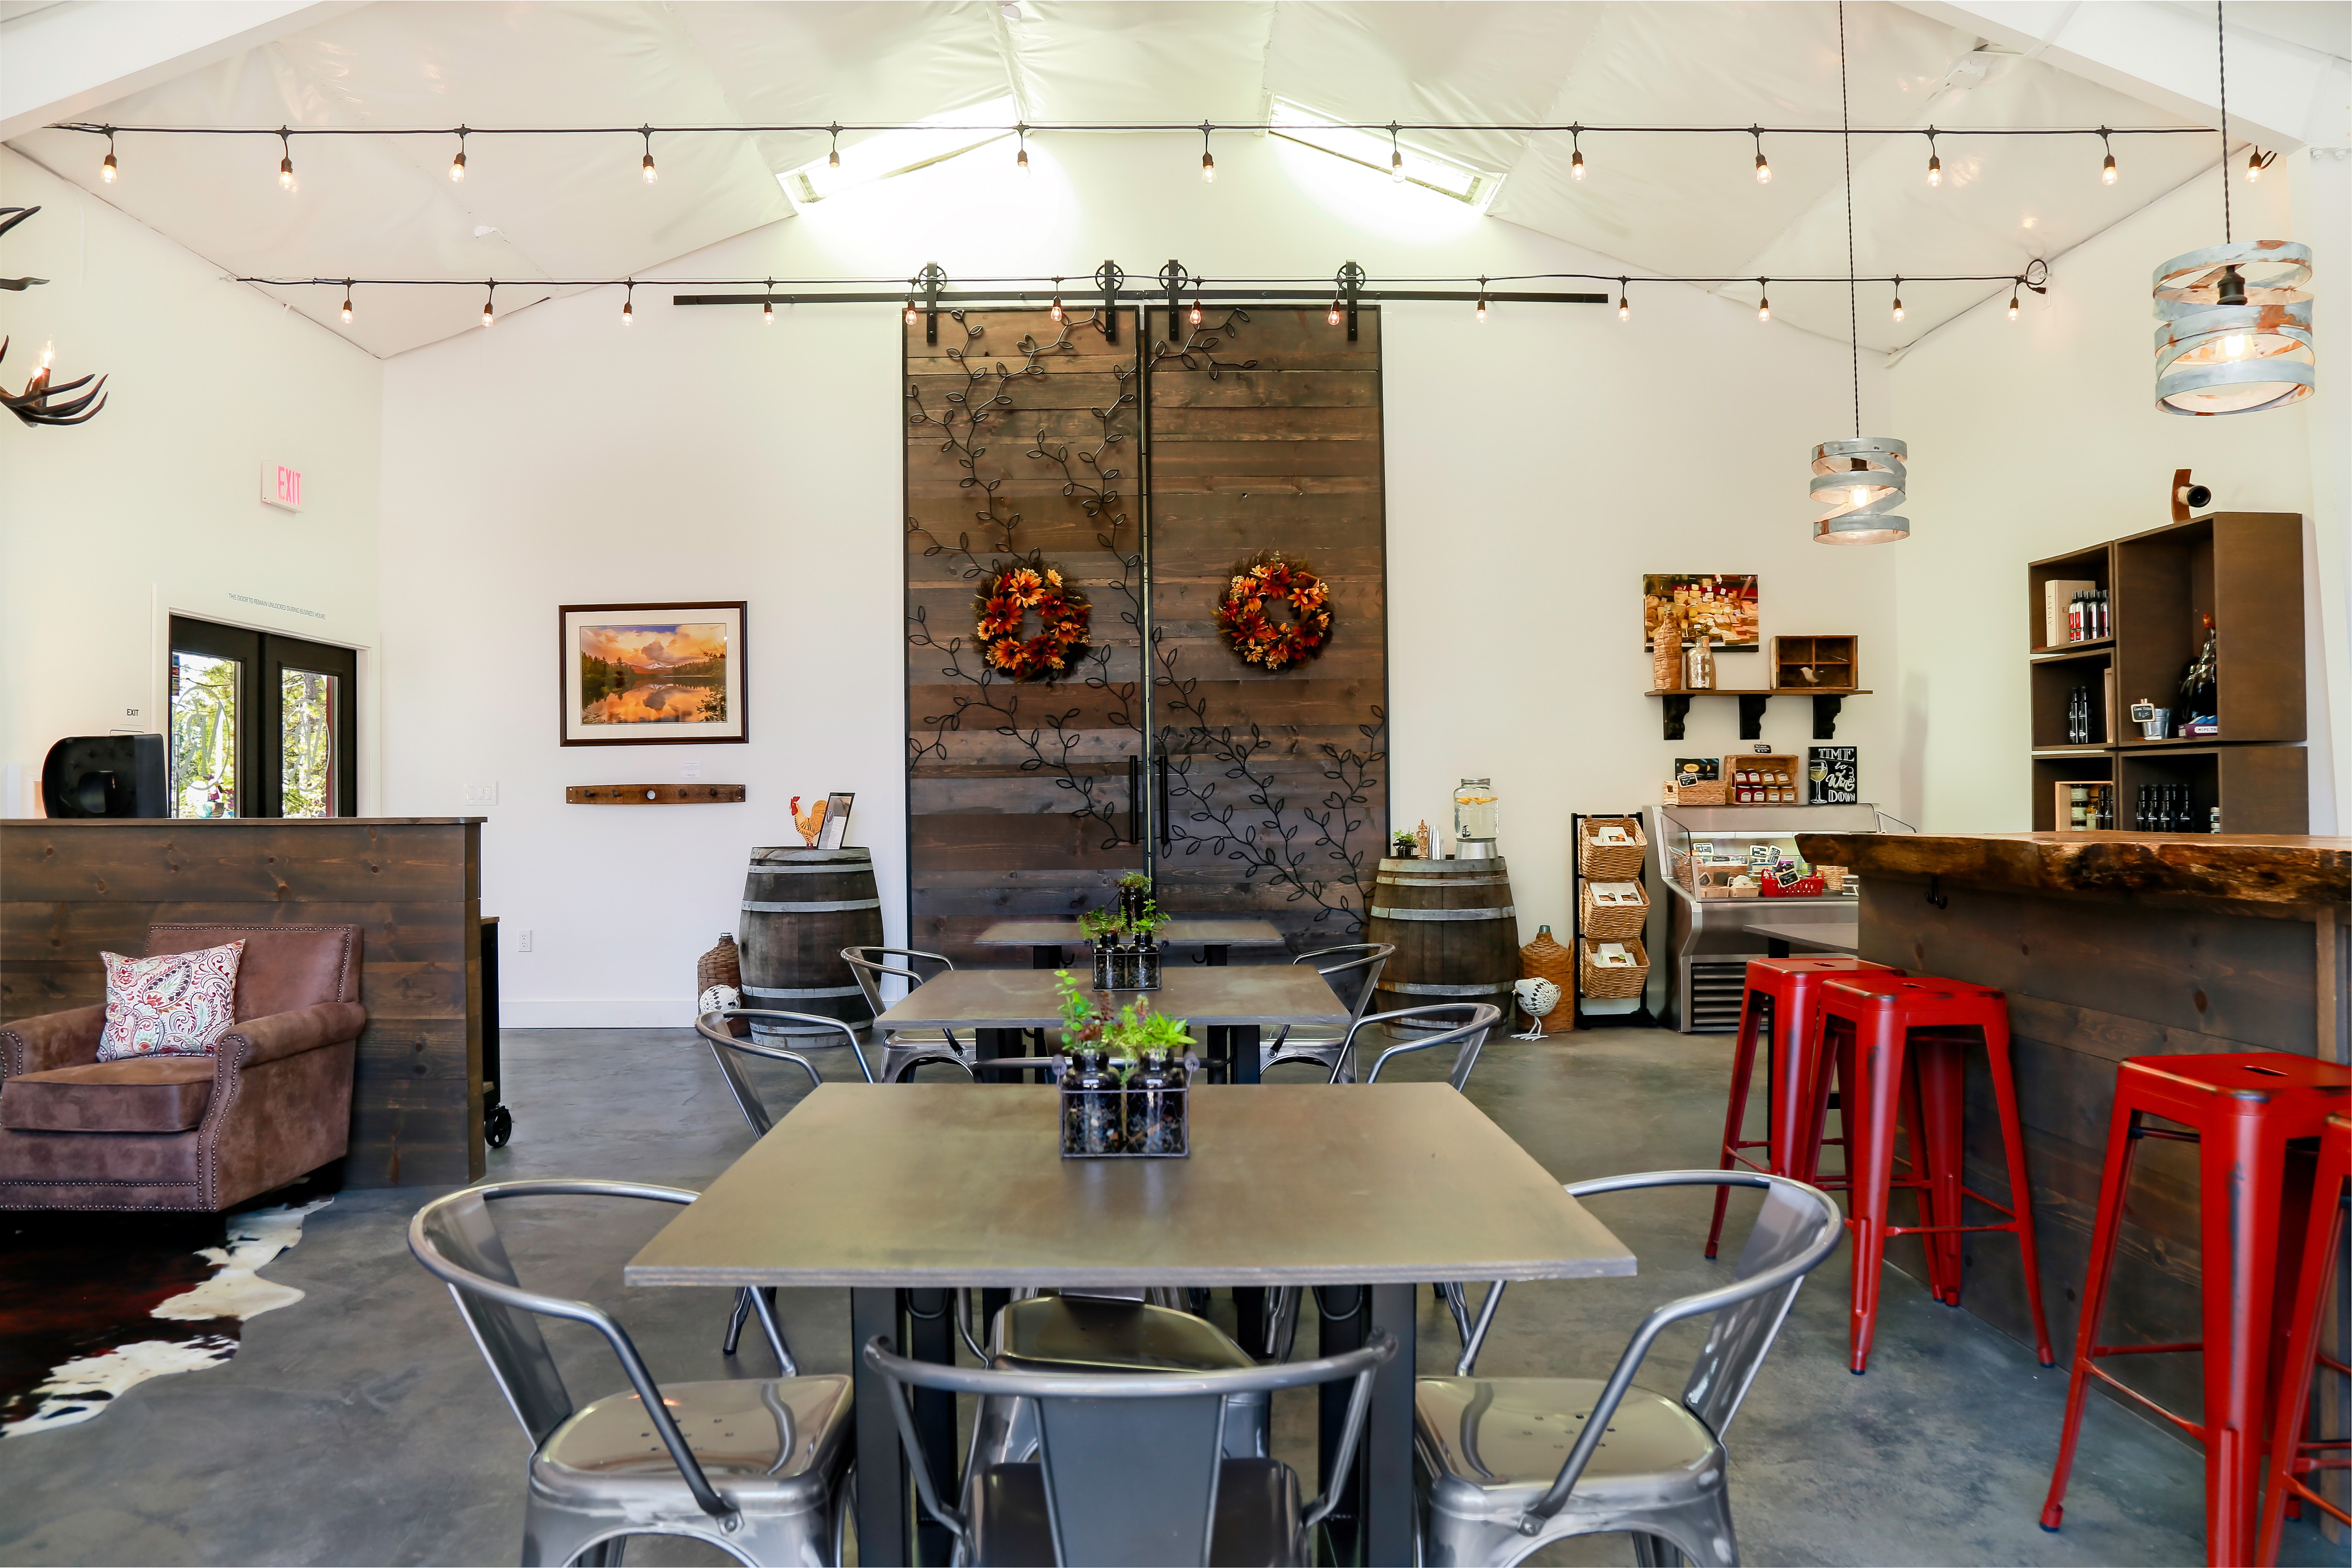 Image of large barn doors and tables and chairs for inside seated tastings